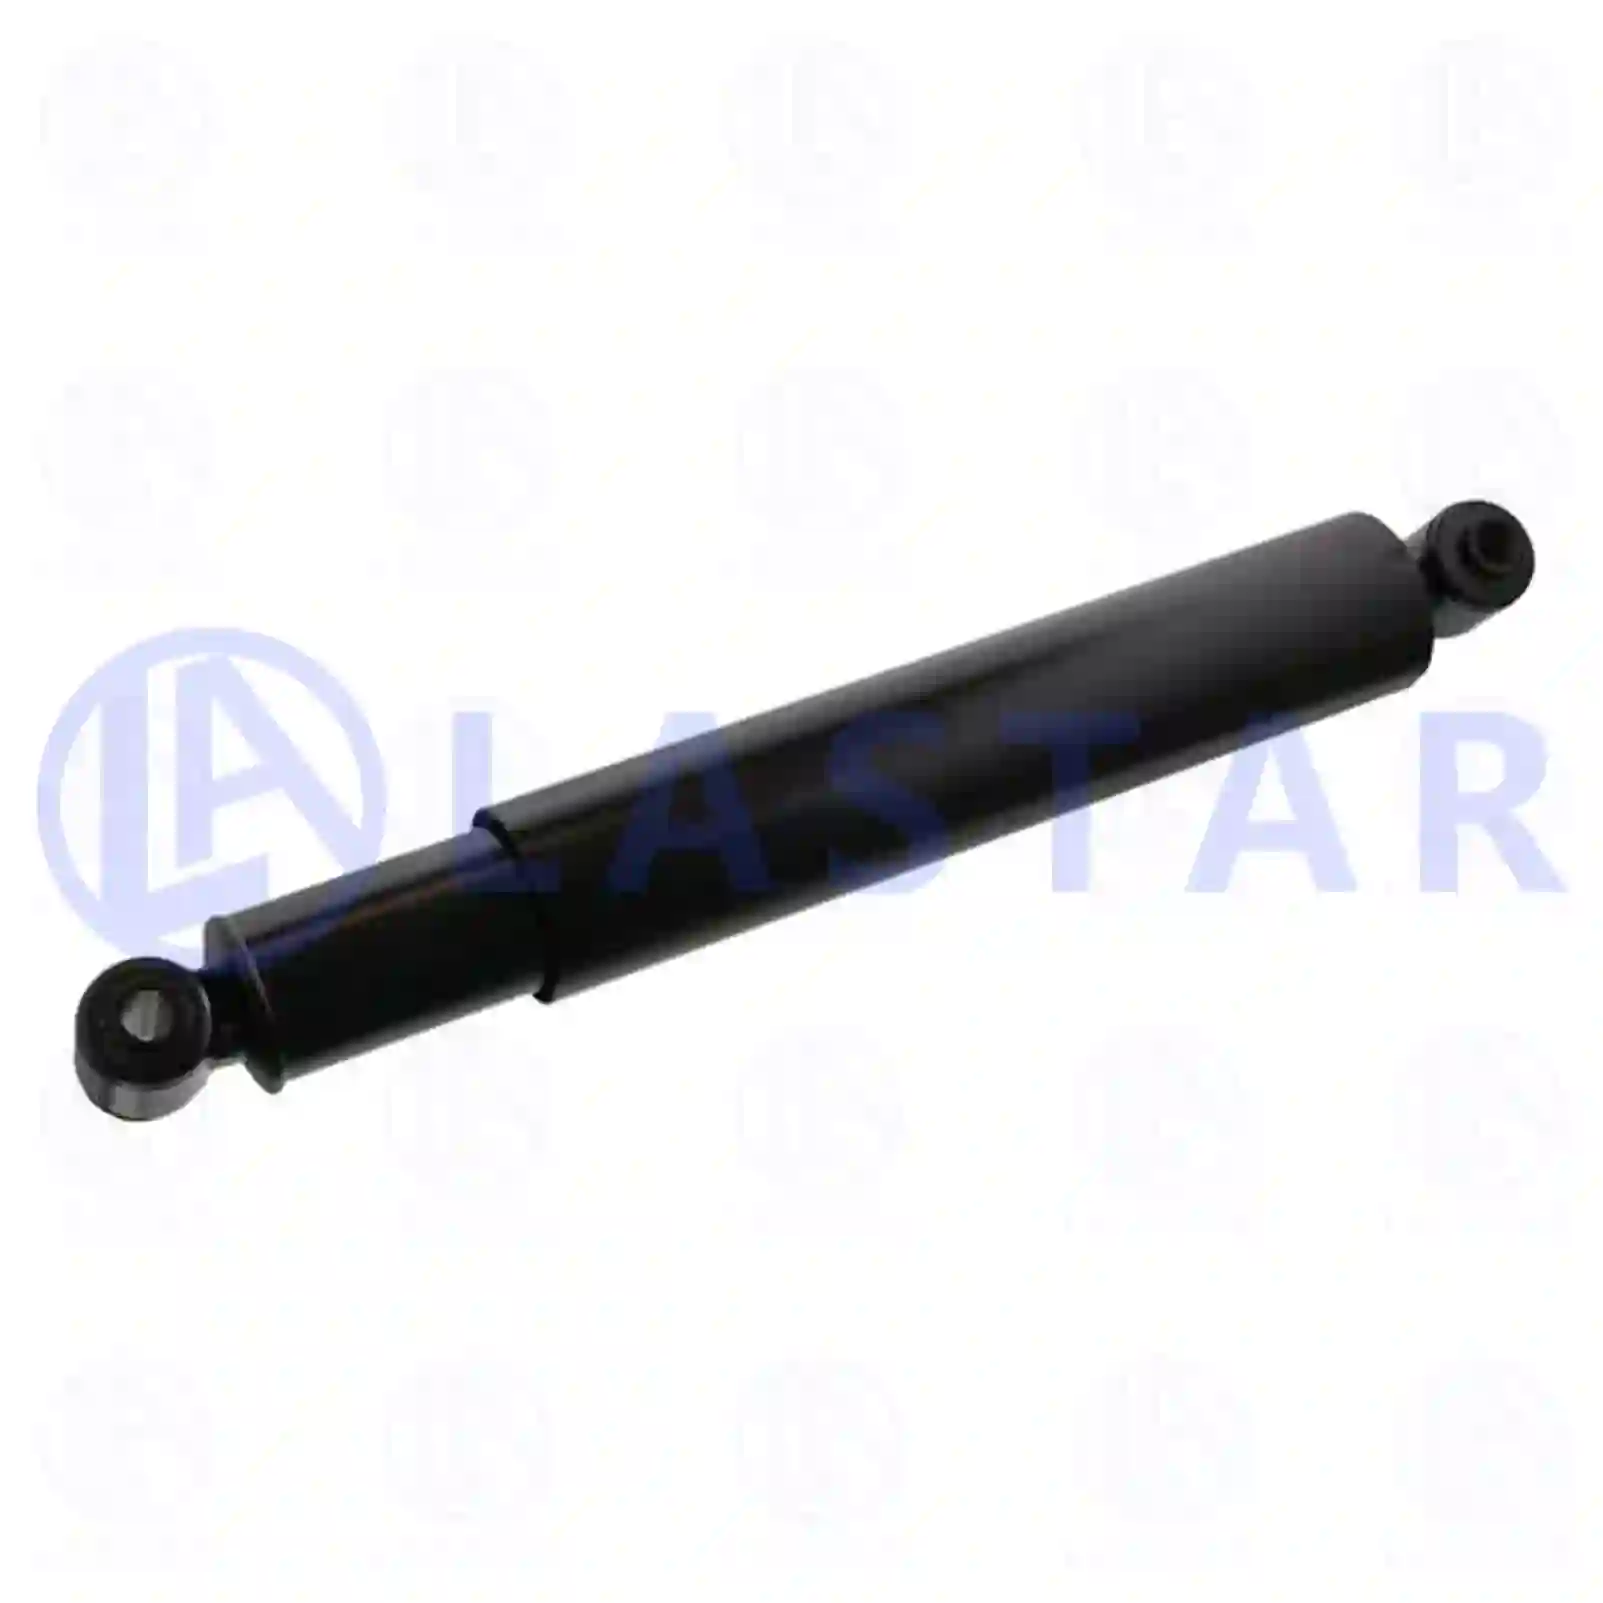 Shock absorber, 77728082, 9703230000, 9703230300, 9703230700, 9703231000 ||  77728082 Lastar Spare Part | Truck Spare Parts, Auotomotive Spare Parts Shock absorber, 77728082, 9703230000, 9703230300, 9703230700, 9703231000 ||  77728082 Lastar Spare Part | Truck Spare Parts, Auotomotive Spare Parts